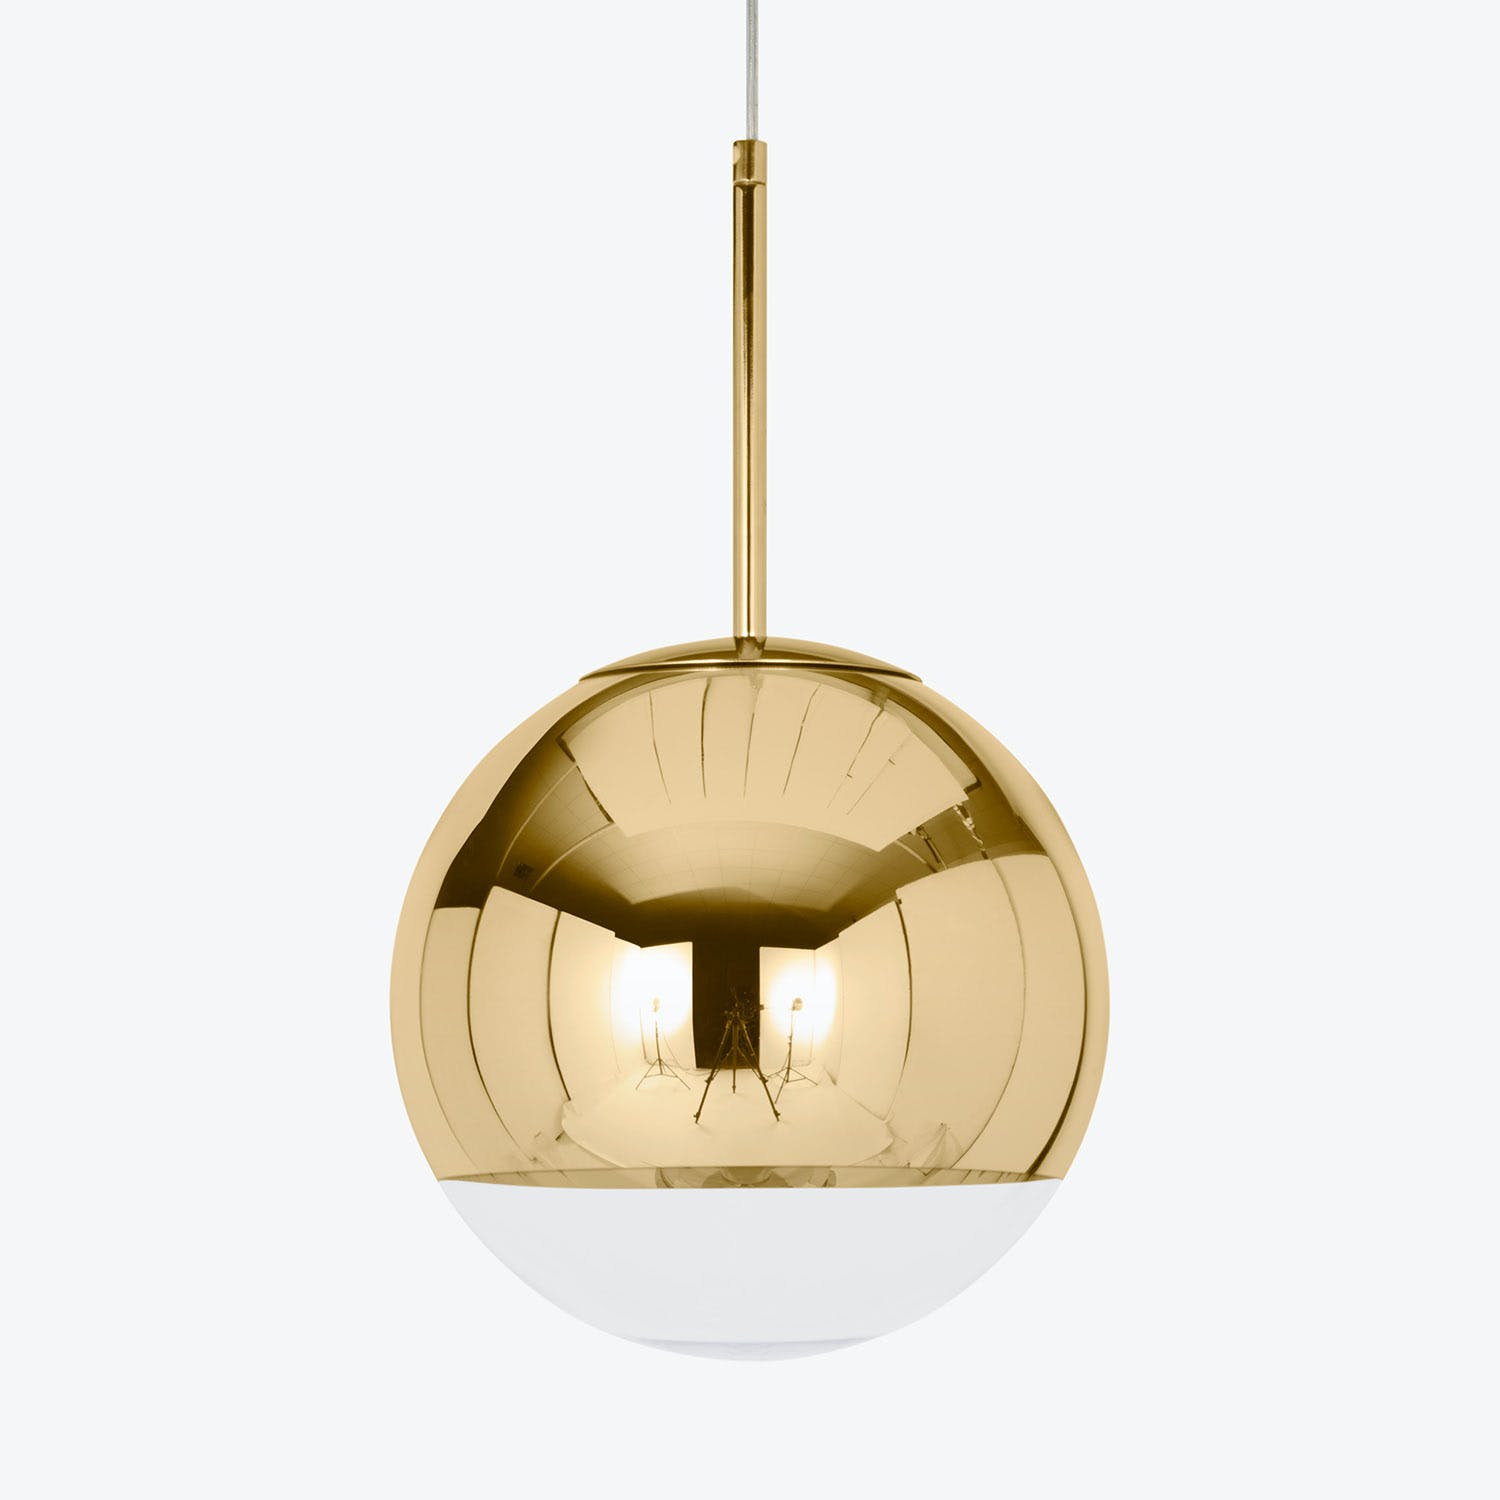 Contemporary pendant light fixture with gold reflective upper half.